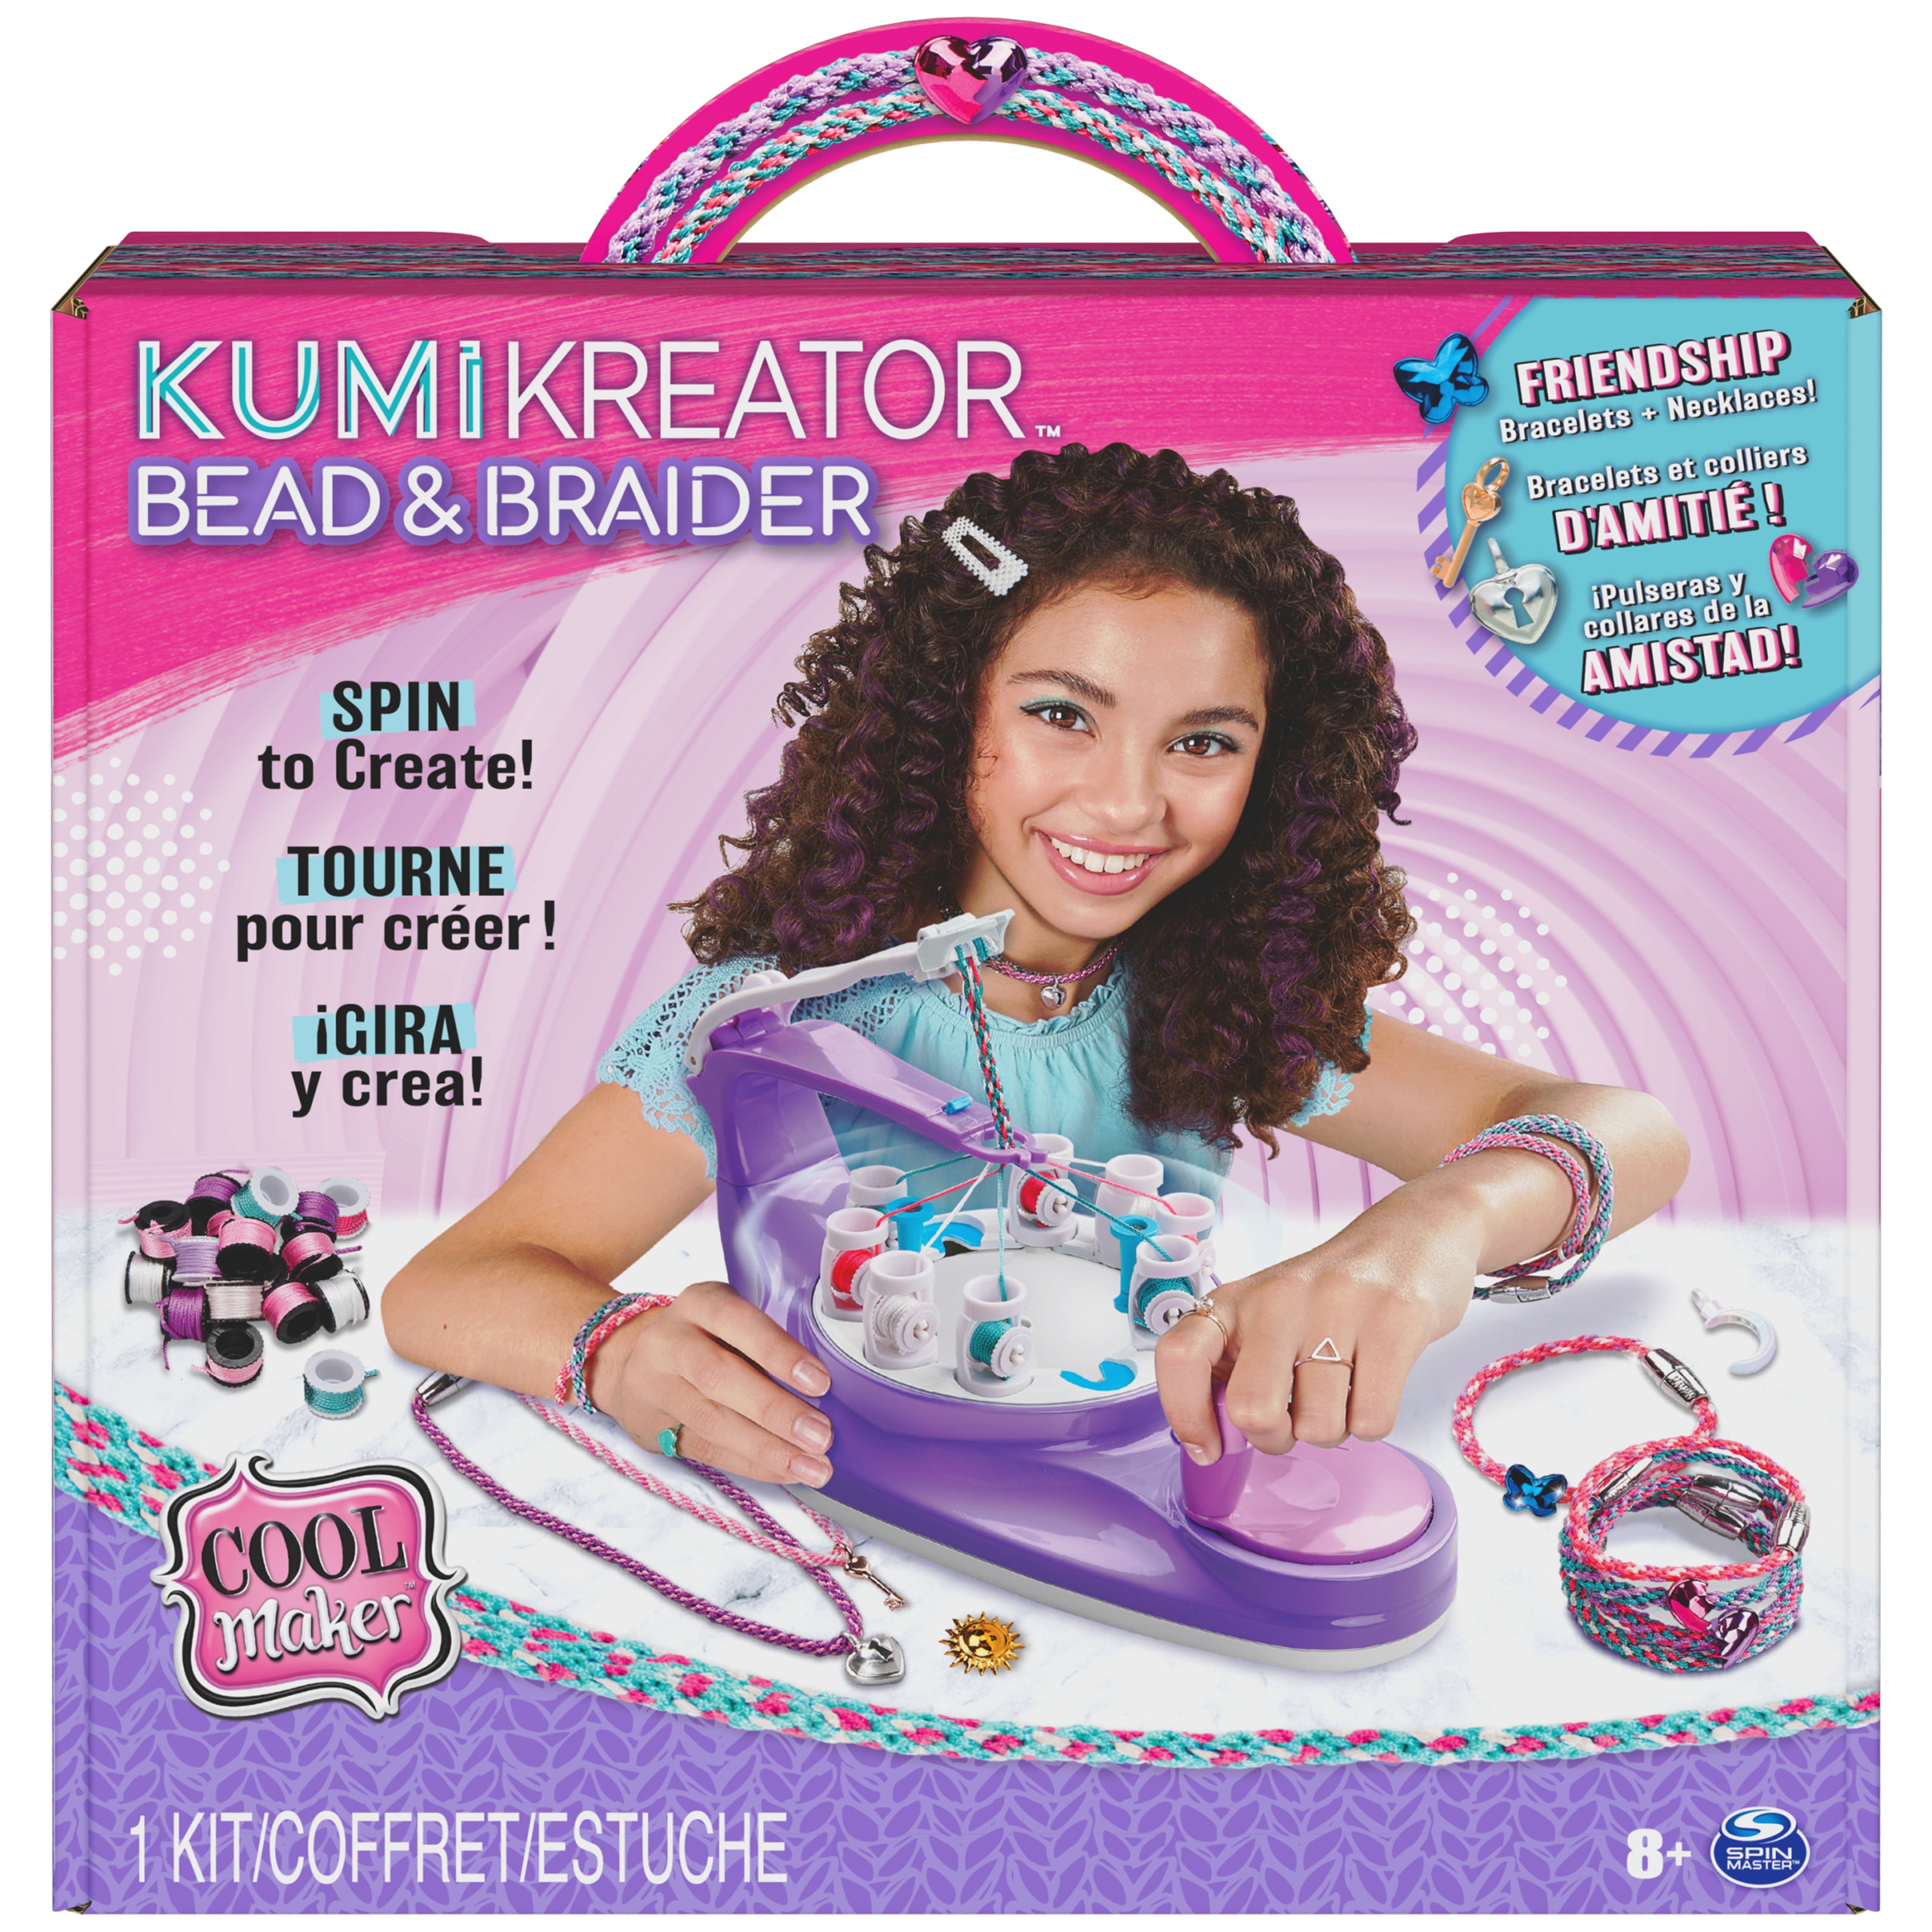 ⭐COOL Refill pack KumiKreator - buy in the online store Familand